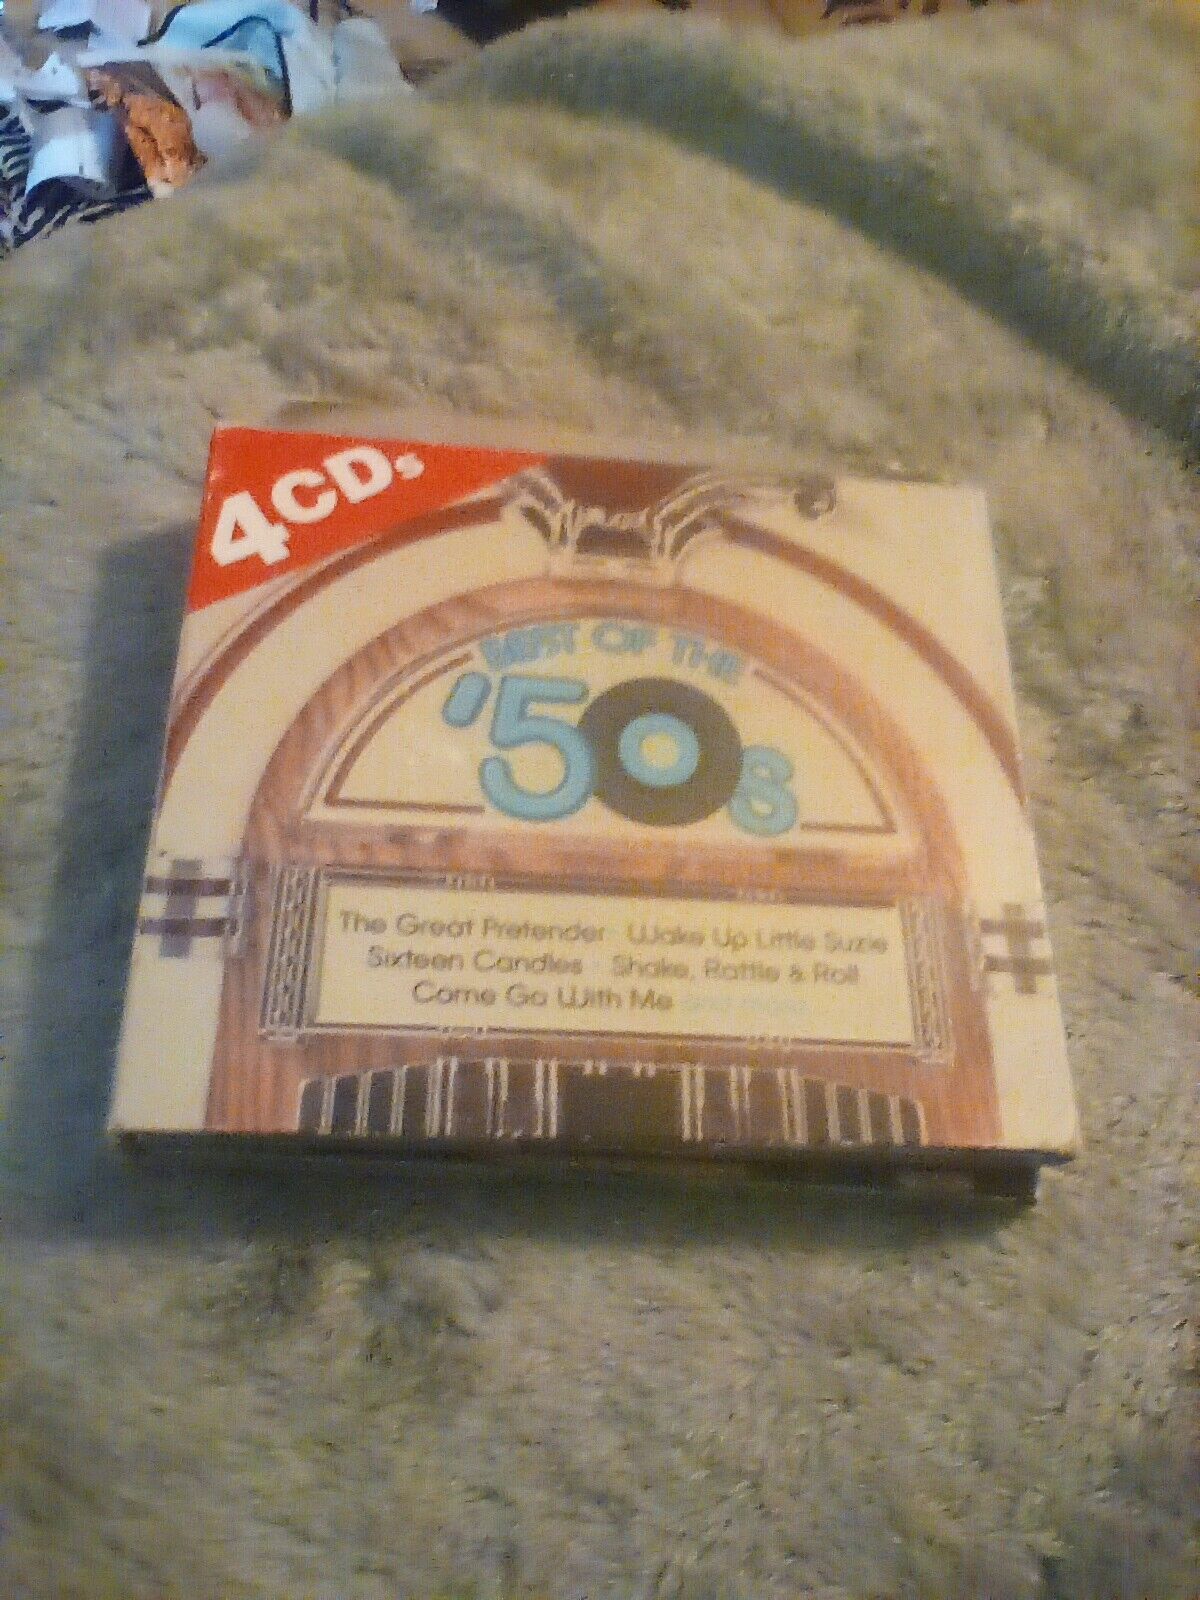 Best of the 50's CD 4 disc set